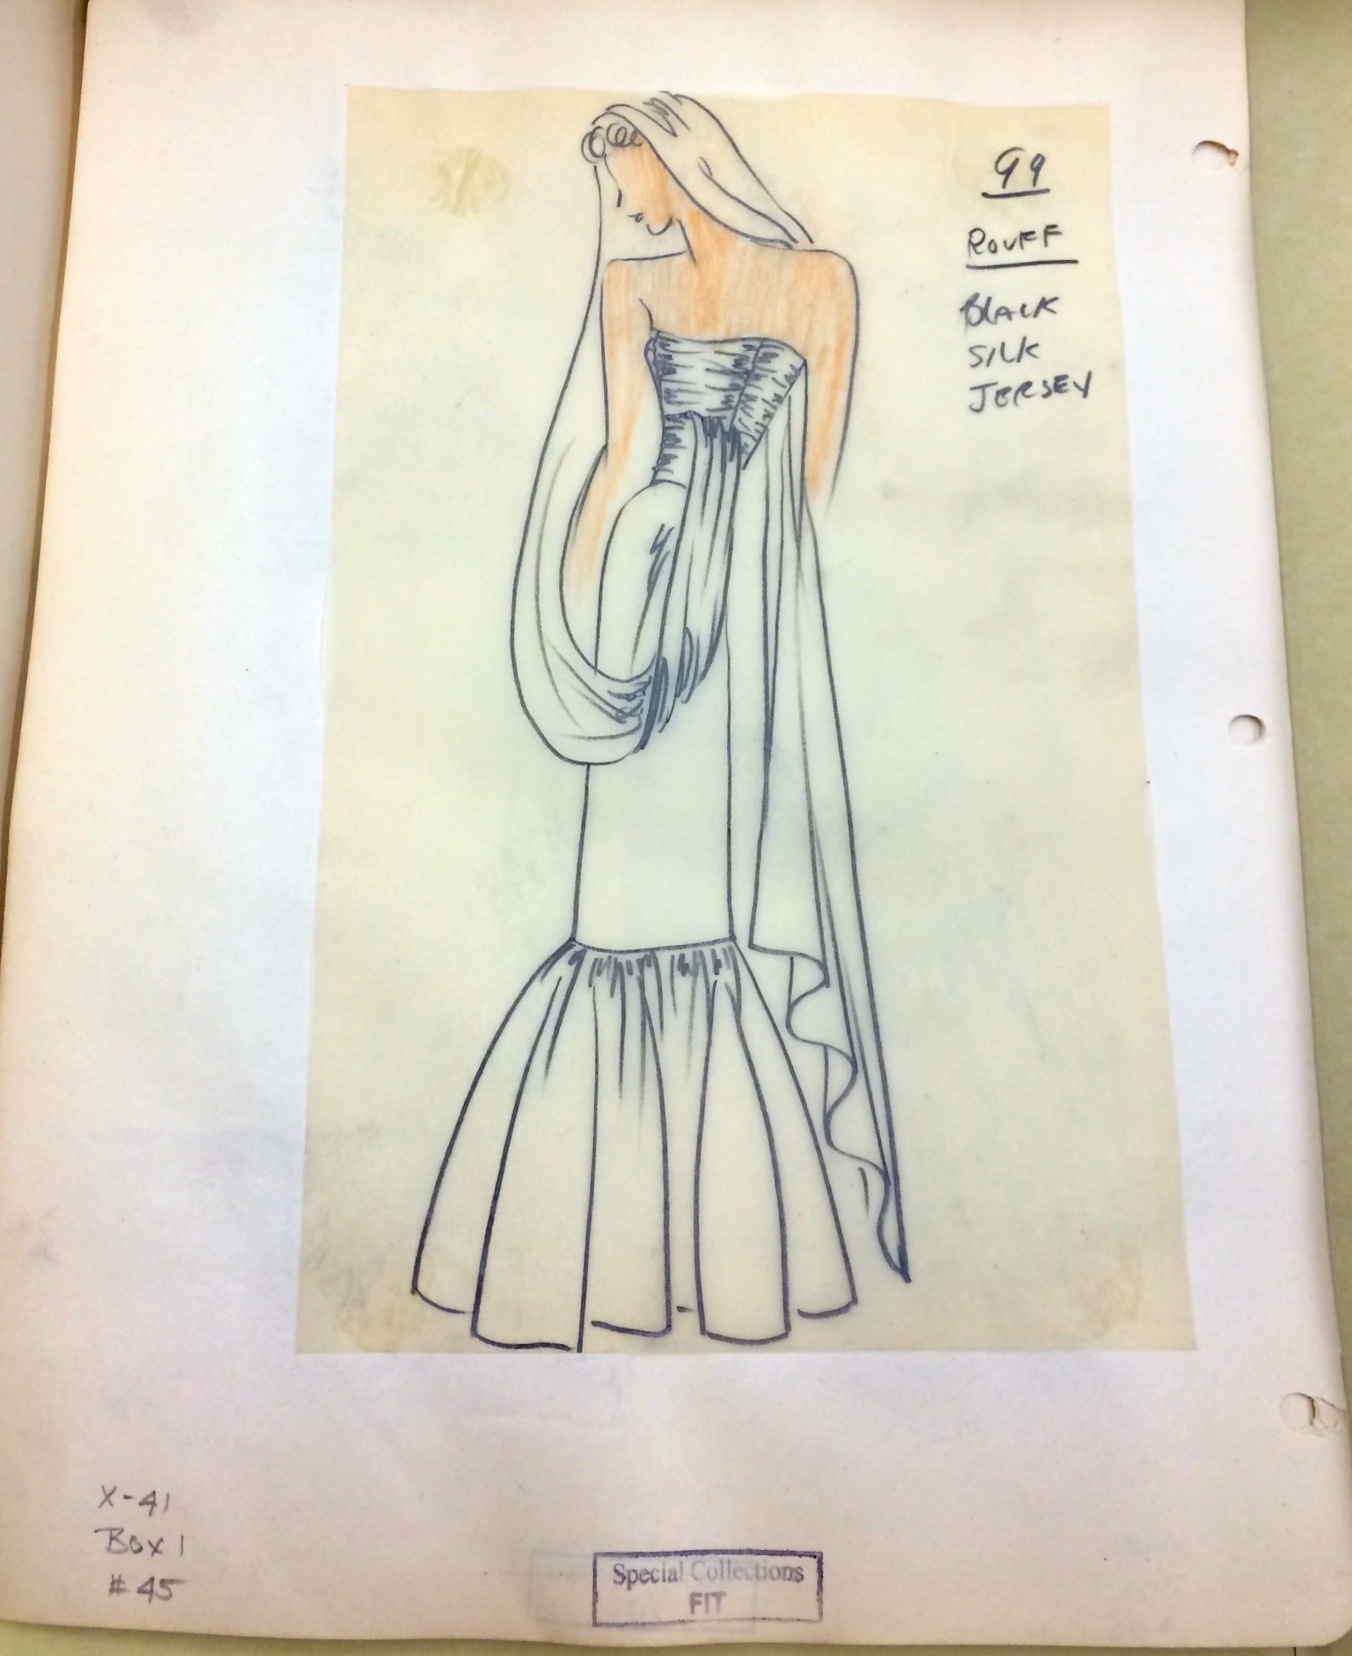 Sketch from the Burleigh Subscription Company. Special Collections at The Fashion Institute of Technology. Image Credit: Giovanna Culora